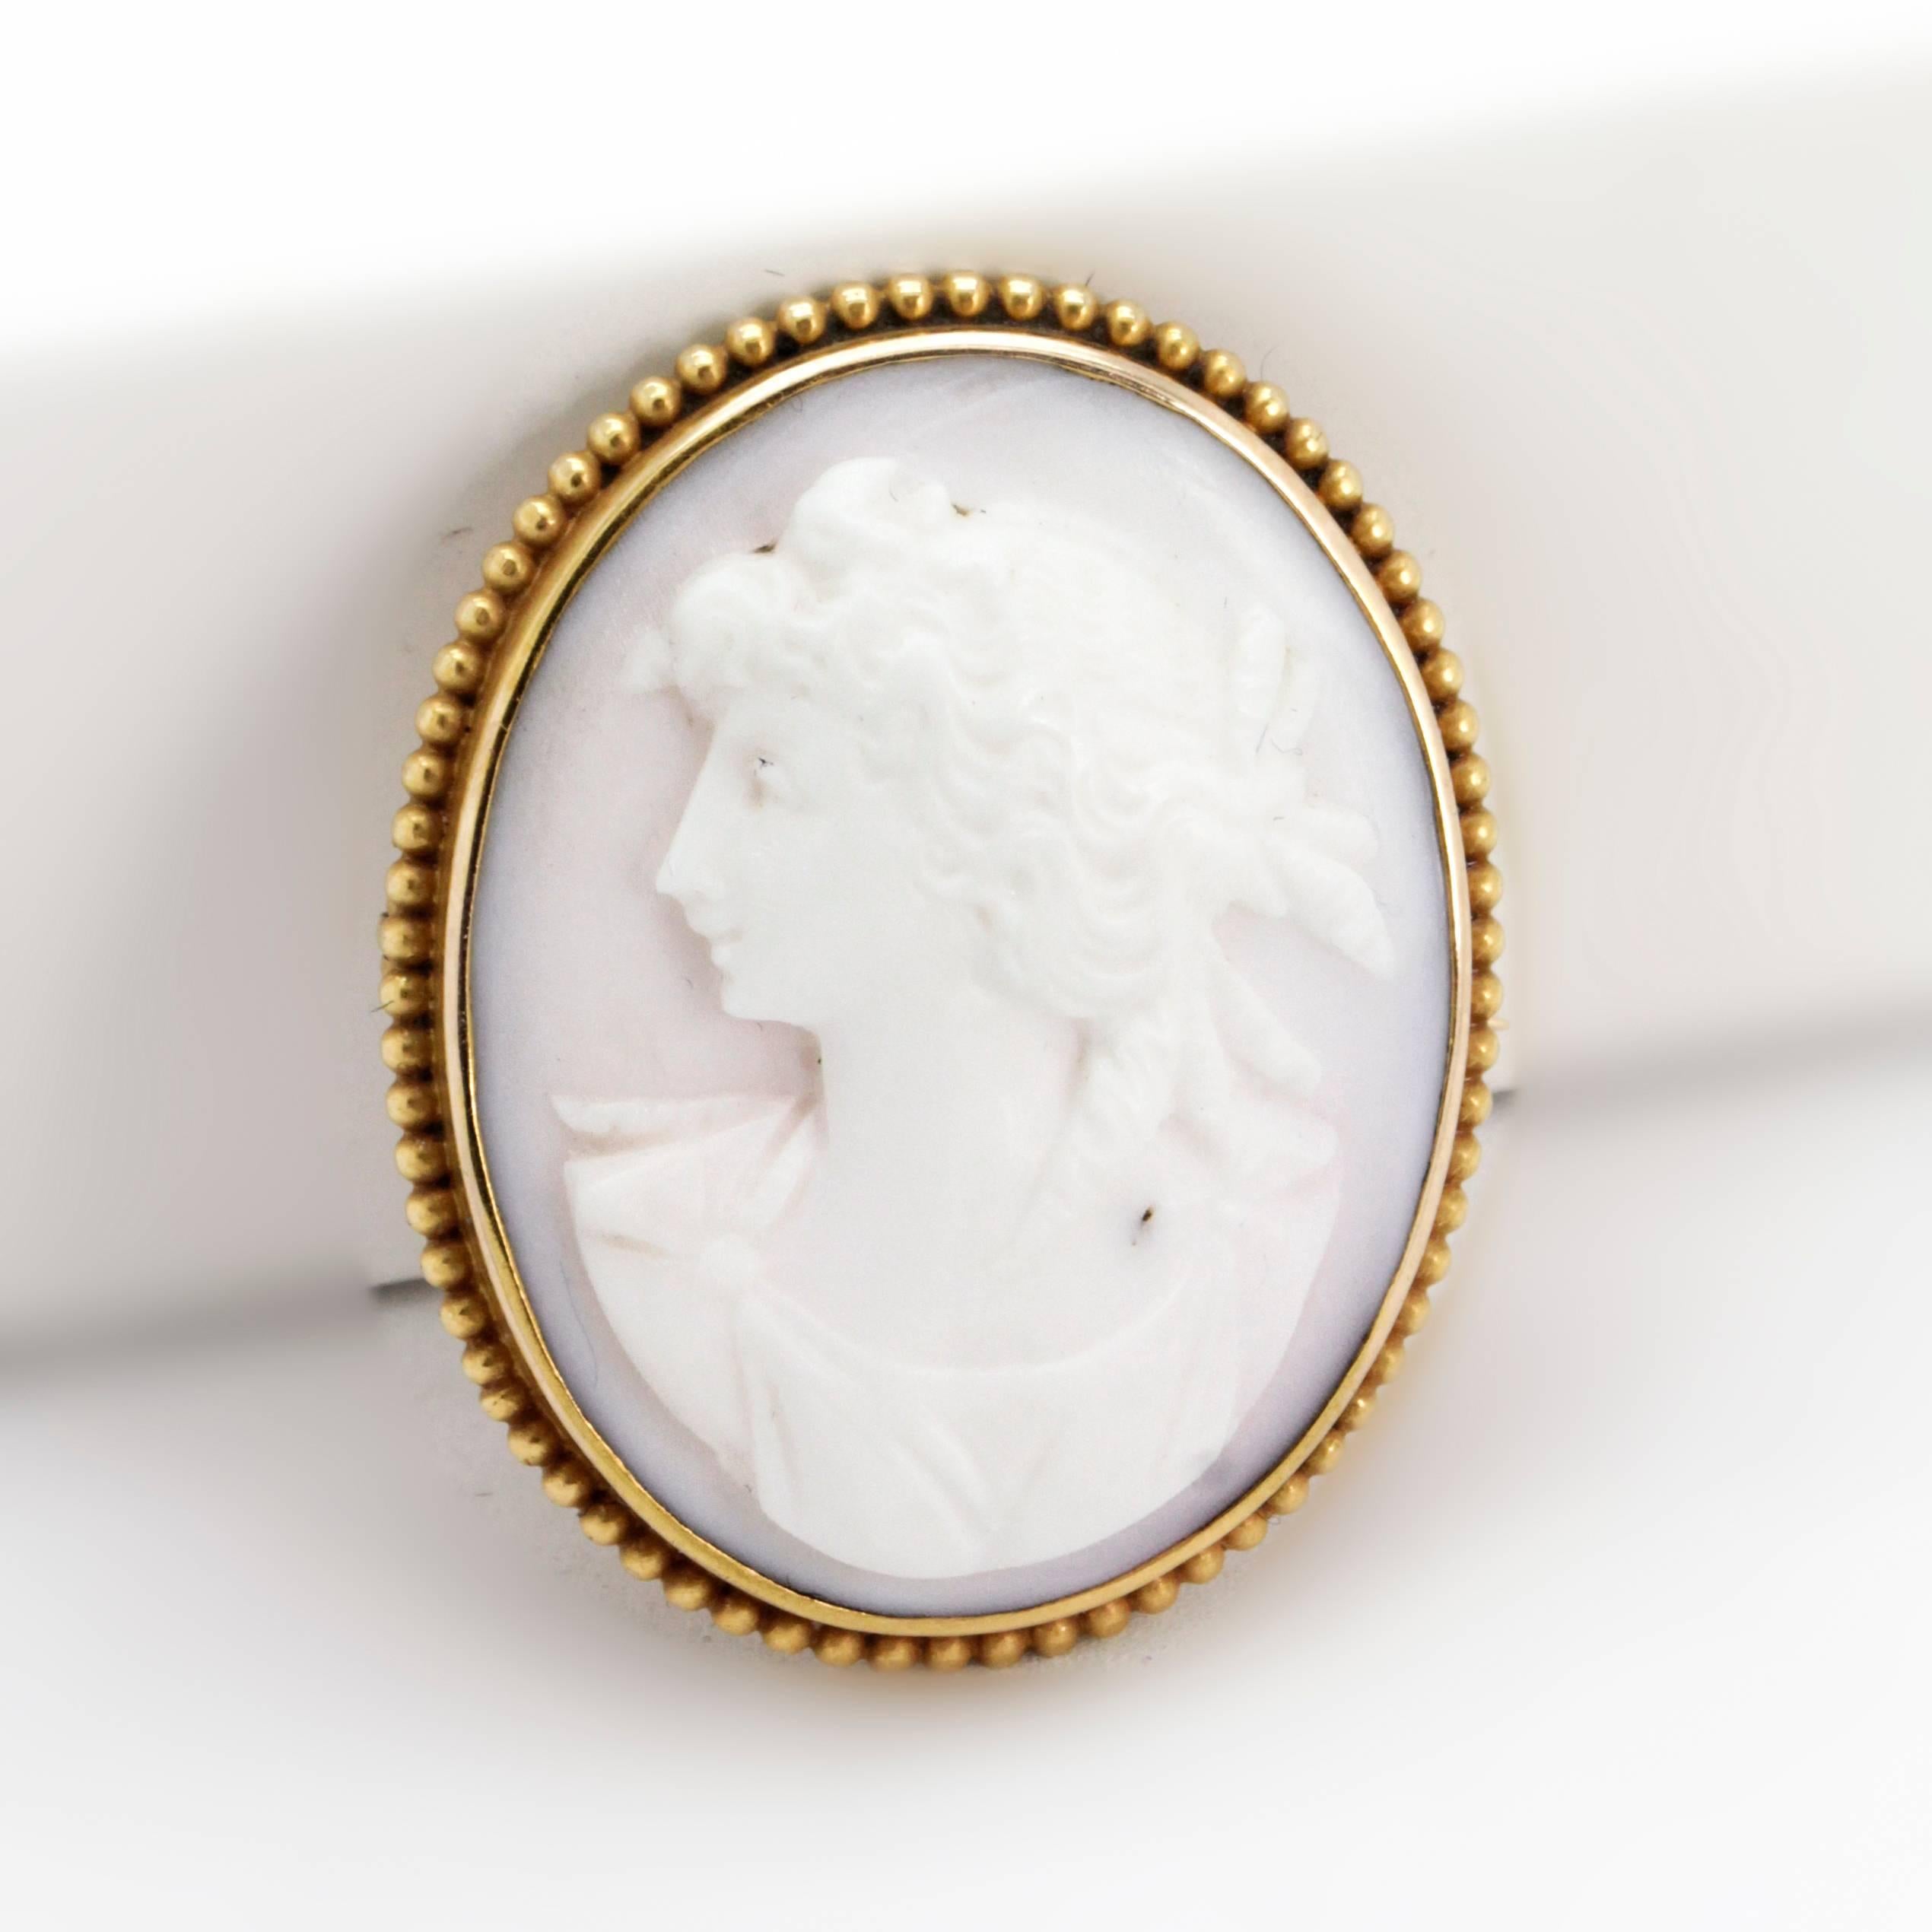 Lovely Victorian Shell Coral Cameo brooch /pin with intricate carving into shell of a Victorian woman with fabulous features and curly locks. 

Very sweet and in very good condition Brooch in 9 ct yellow to rose gold

Approximate Dimensions:
Width =